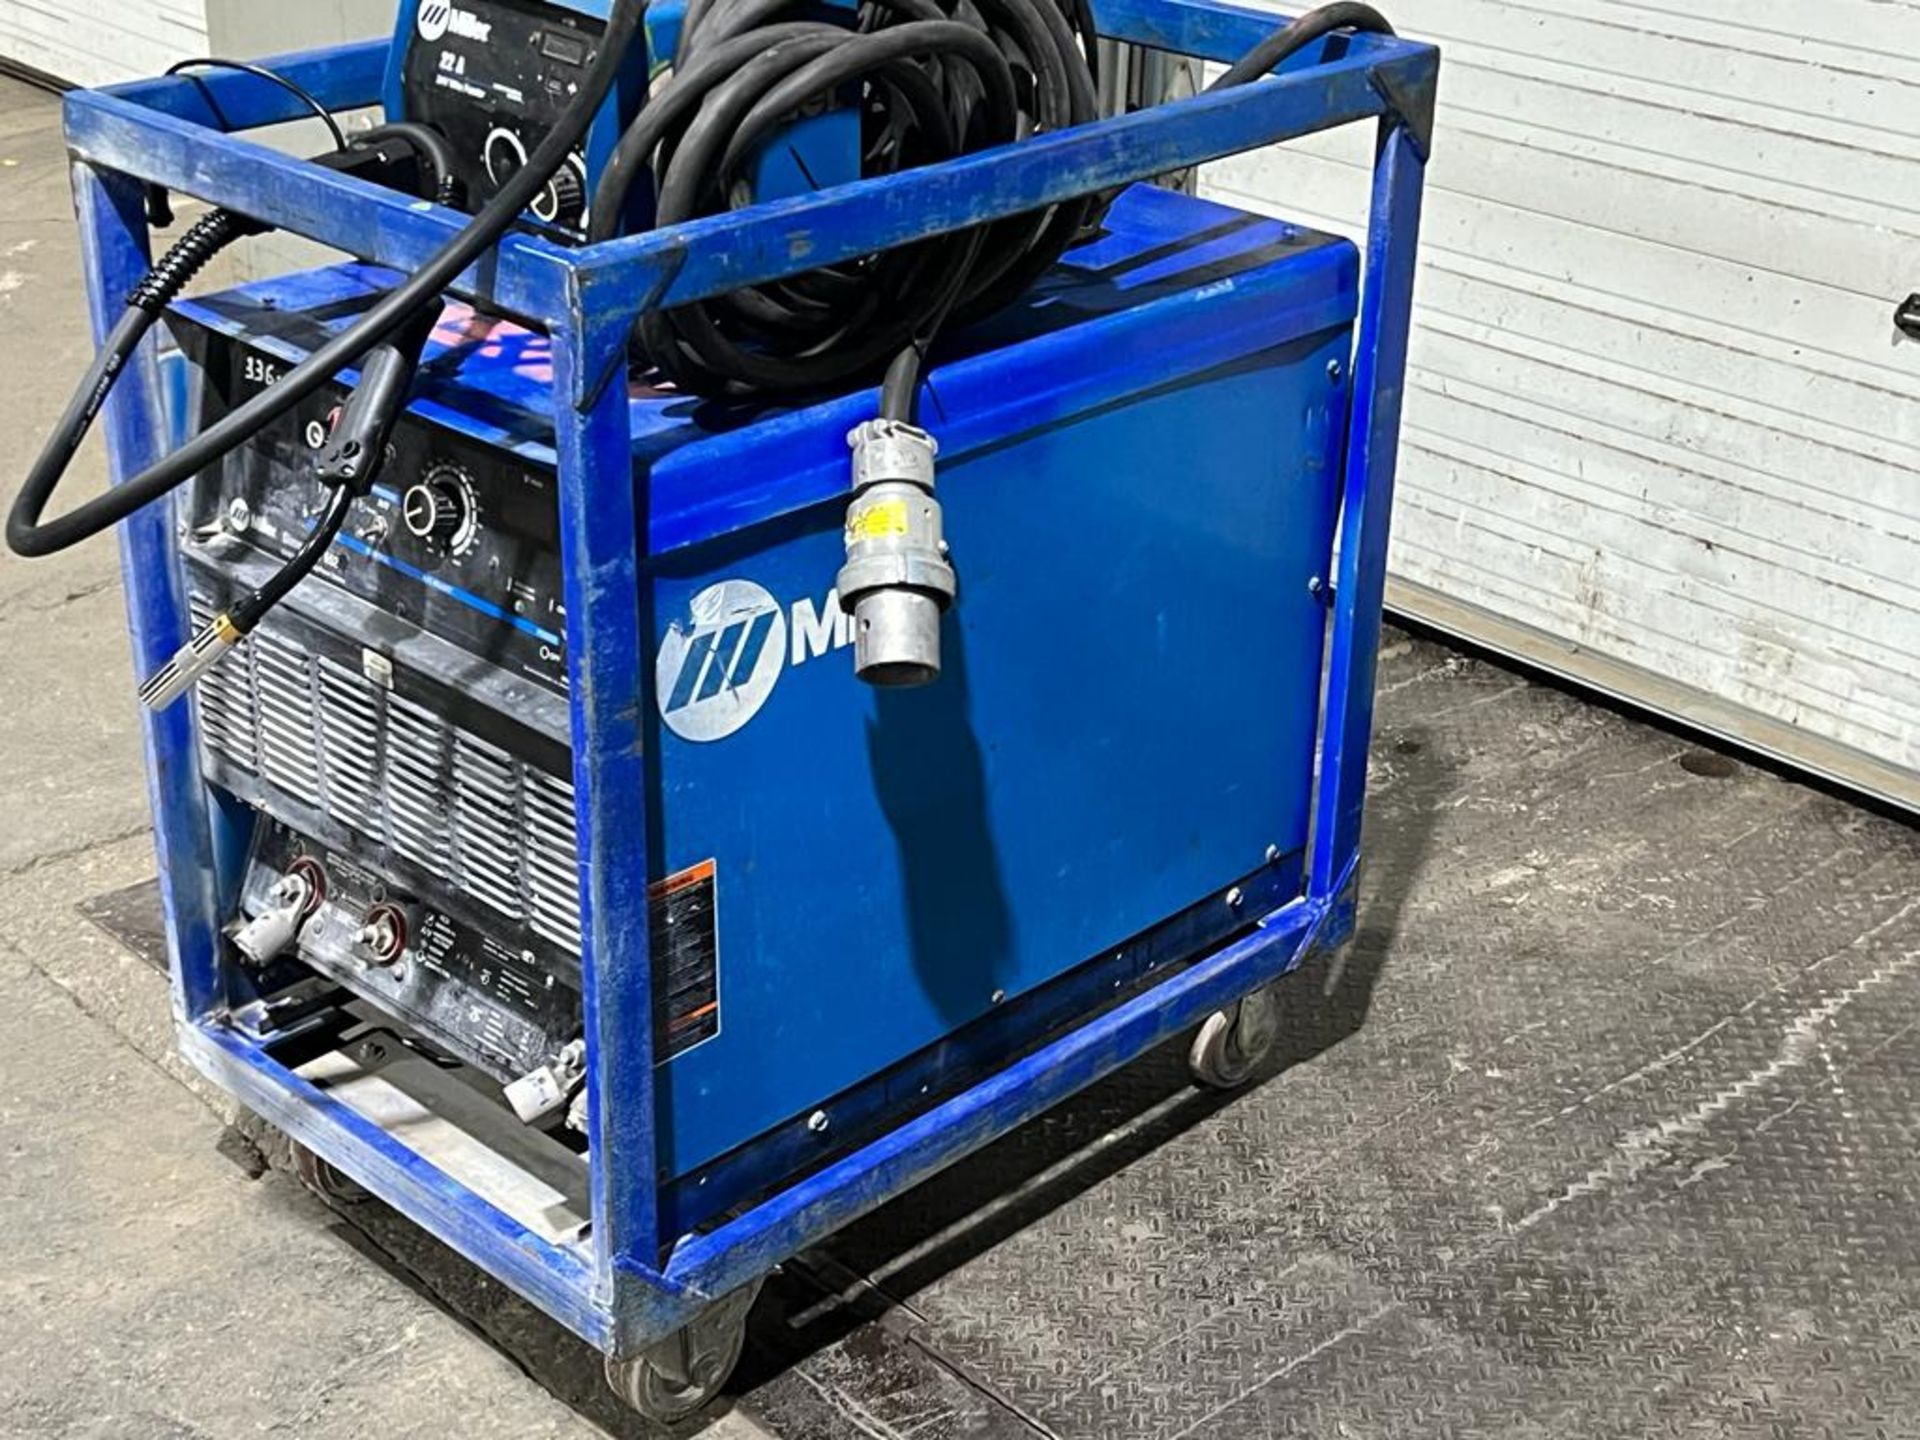 Miller Dimension 652 Mig Welder 650 Amp Mig Tig Stick Multi-Process Power Source with New Wire